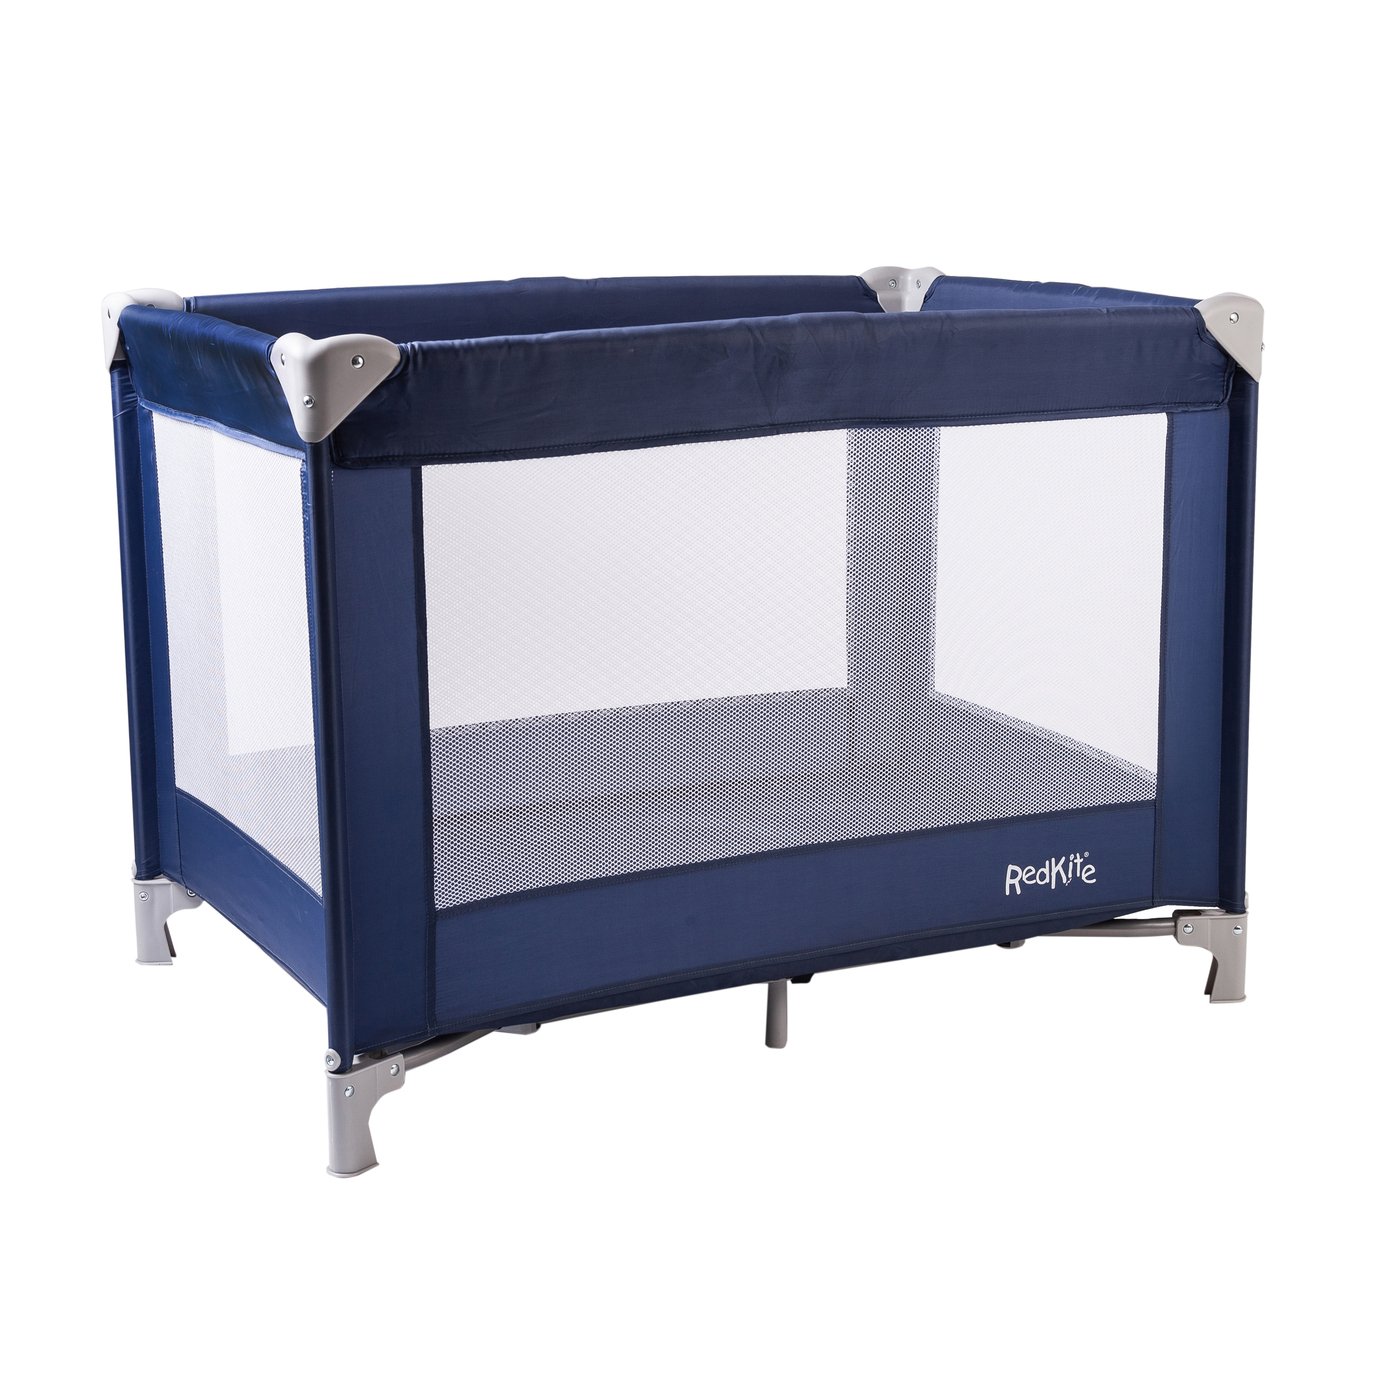 Red Kite Sleeptight Ship Ahoy Travel Cot Review